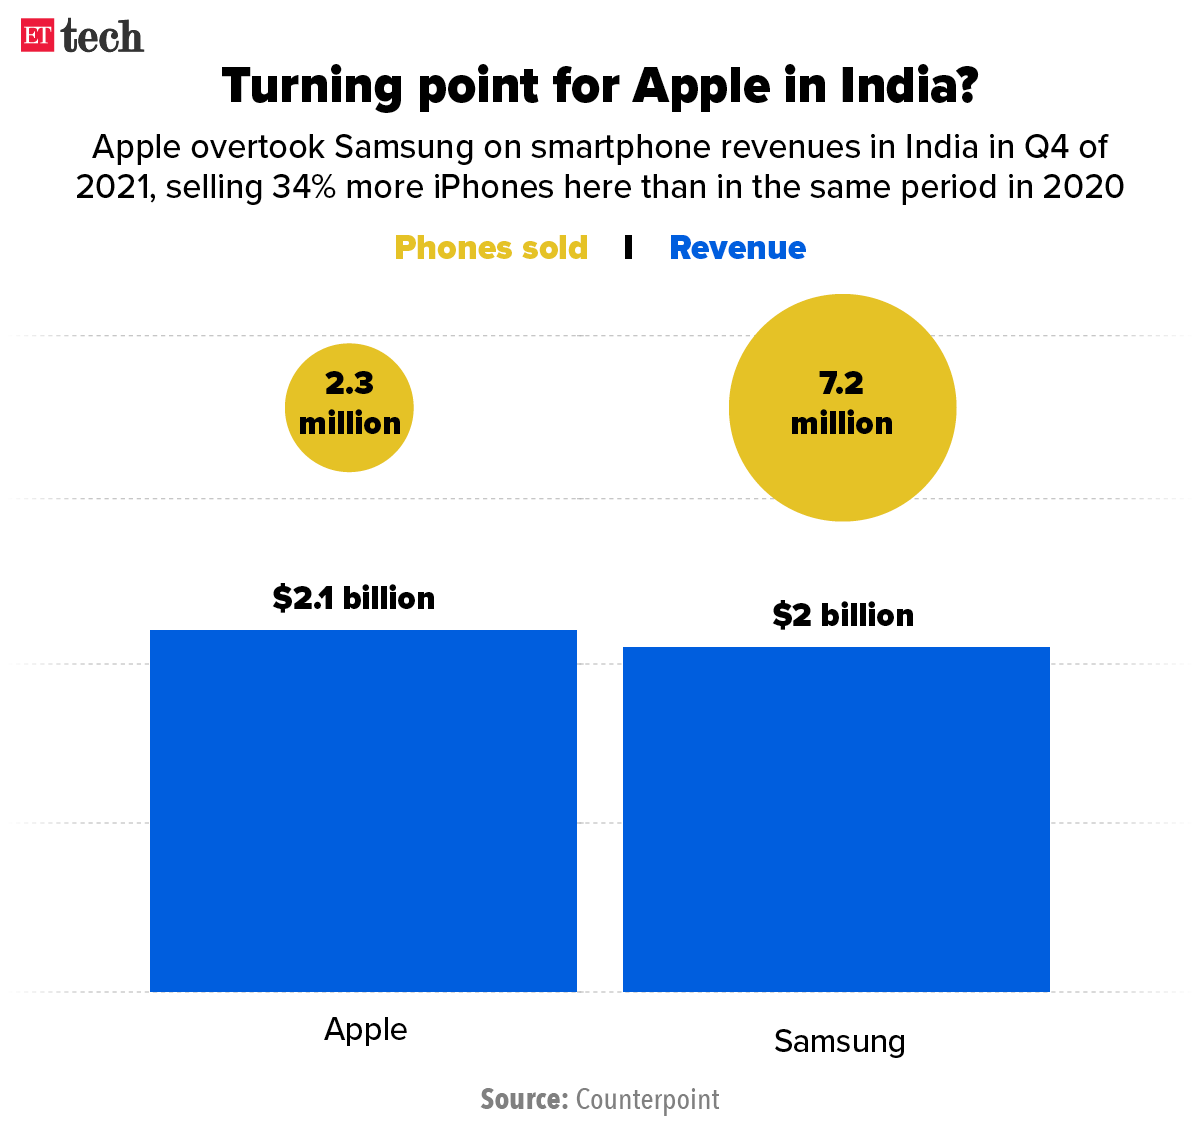 Turning point for Apple in India